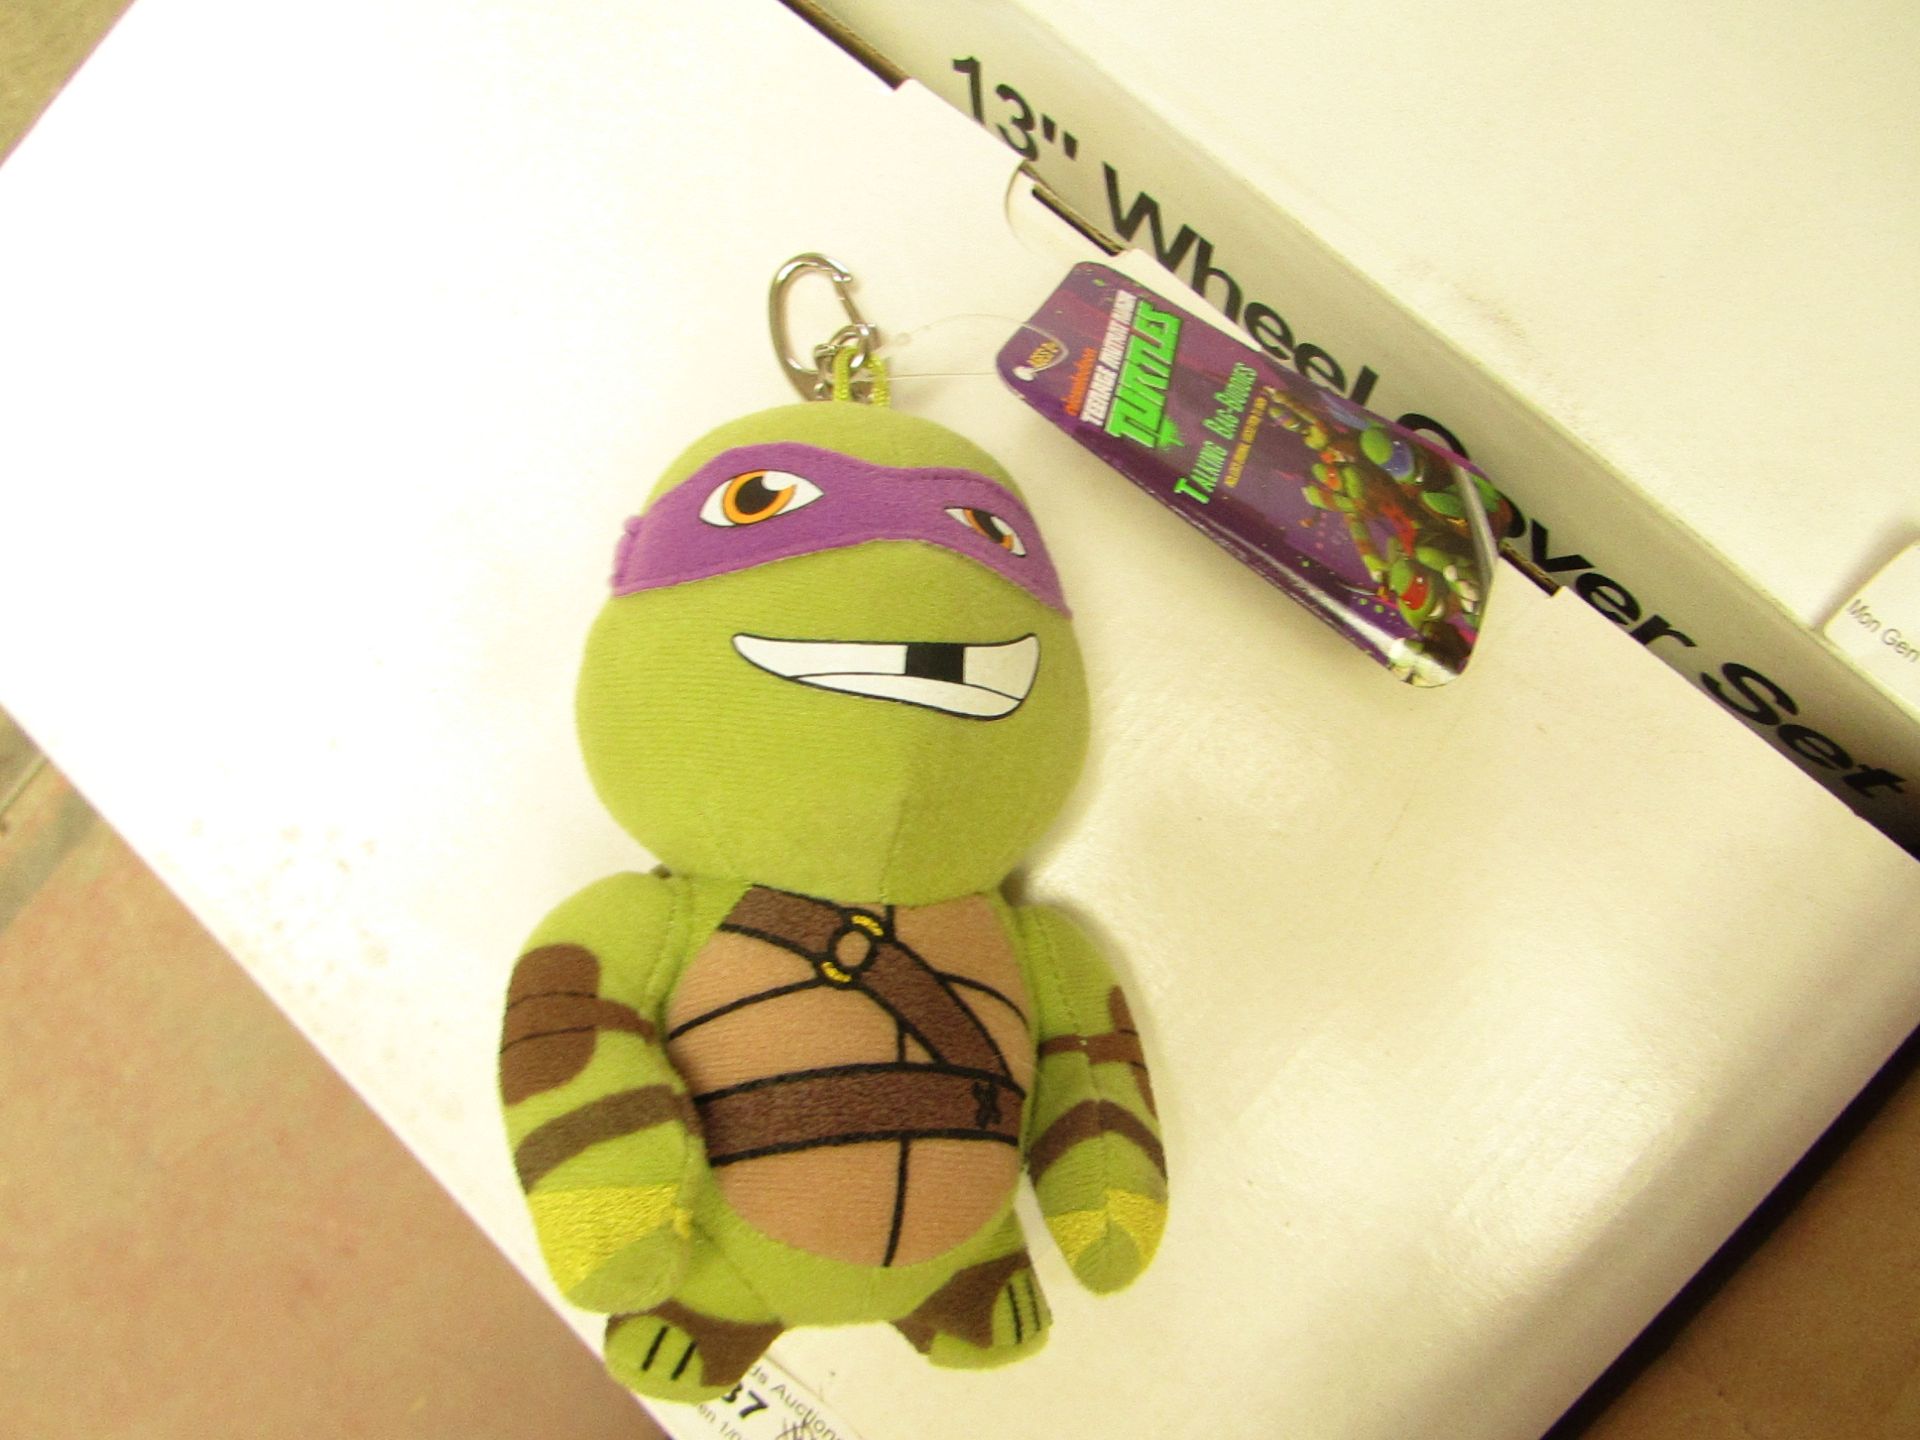 Turtles Talking Bag Buddies. Unused with tags. Incl Original Voices from the TV Show.